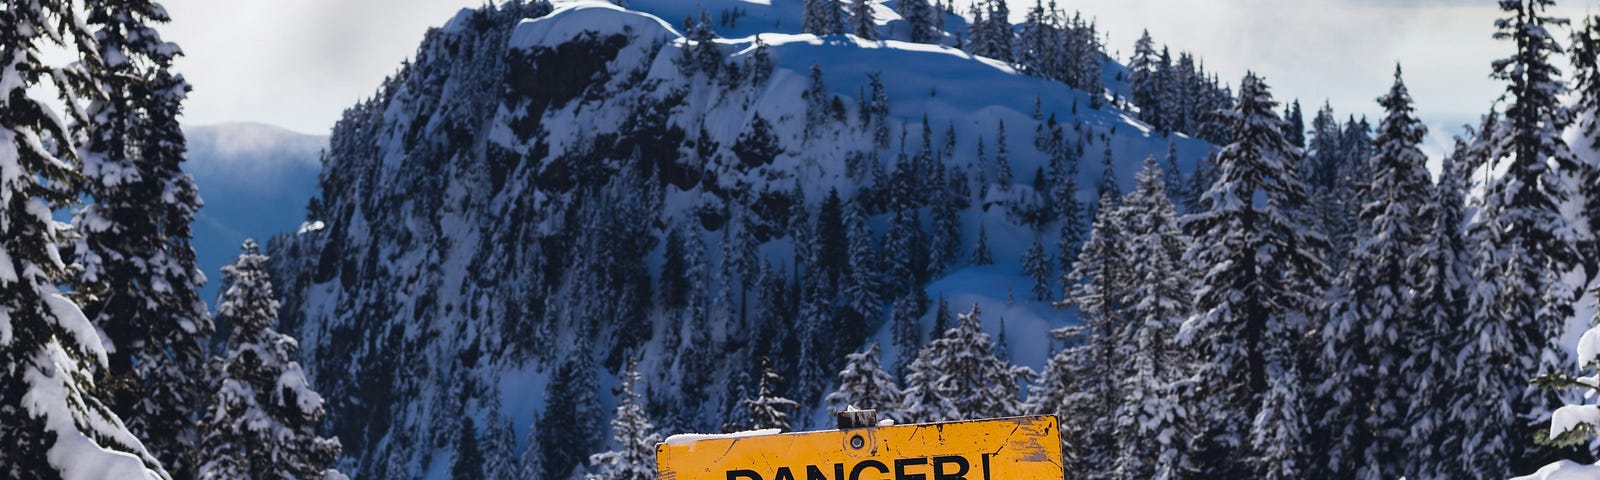 Sign warning of steep terrain and cliffs in front of snow-covered mountain and trees